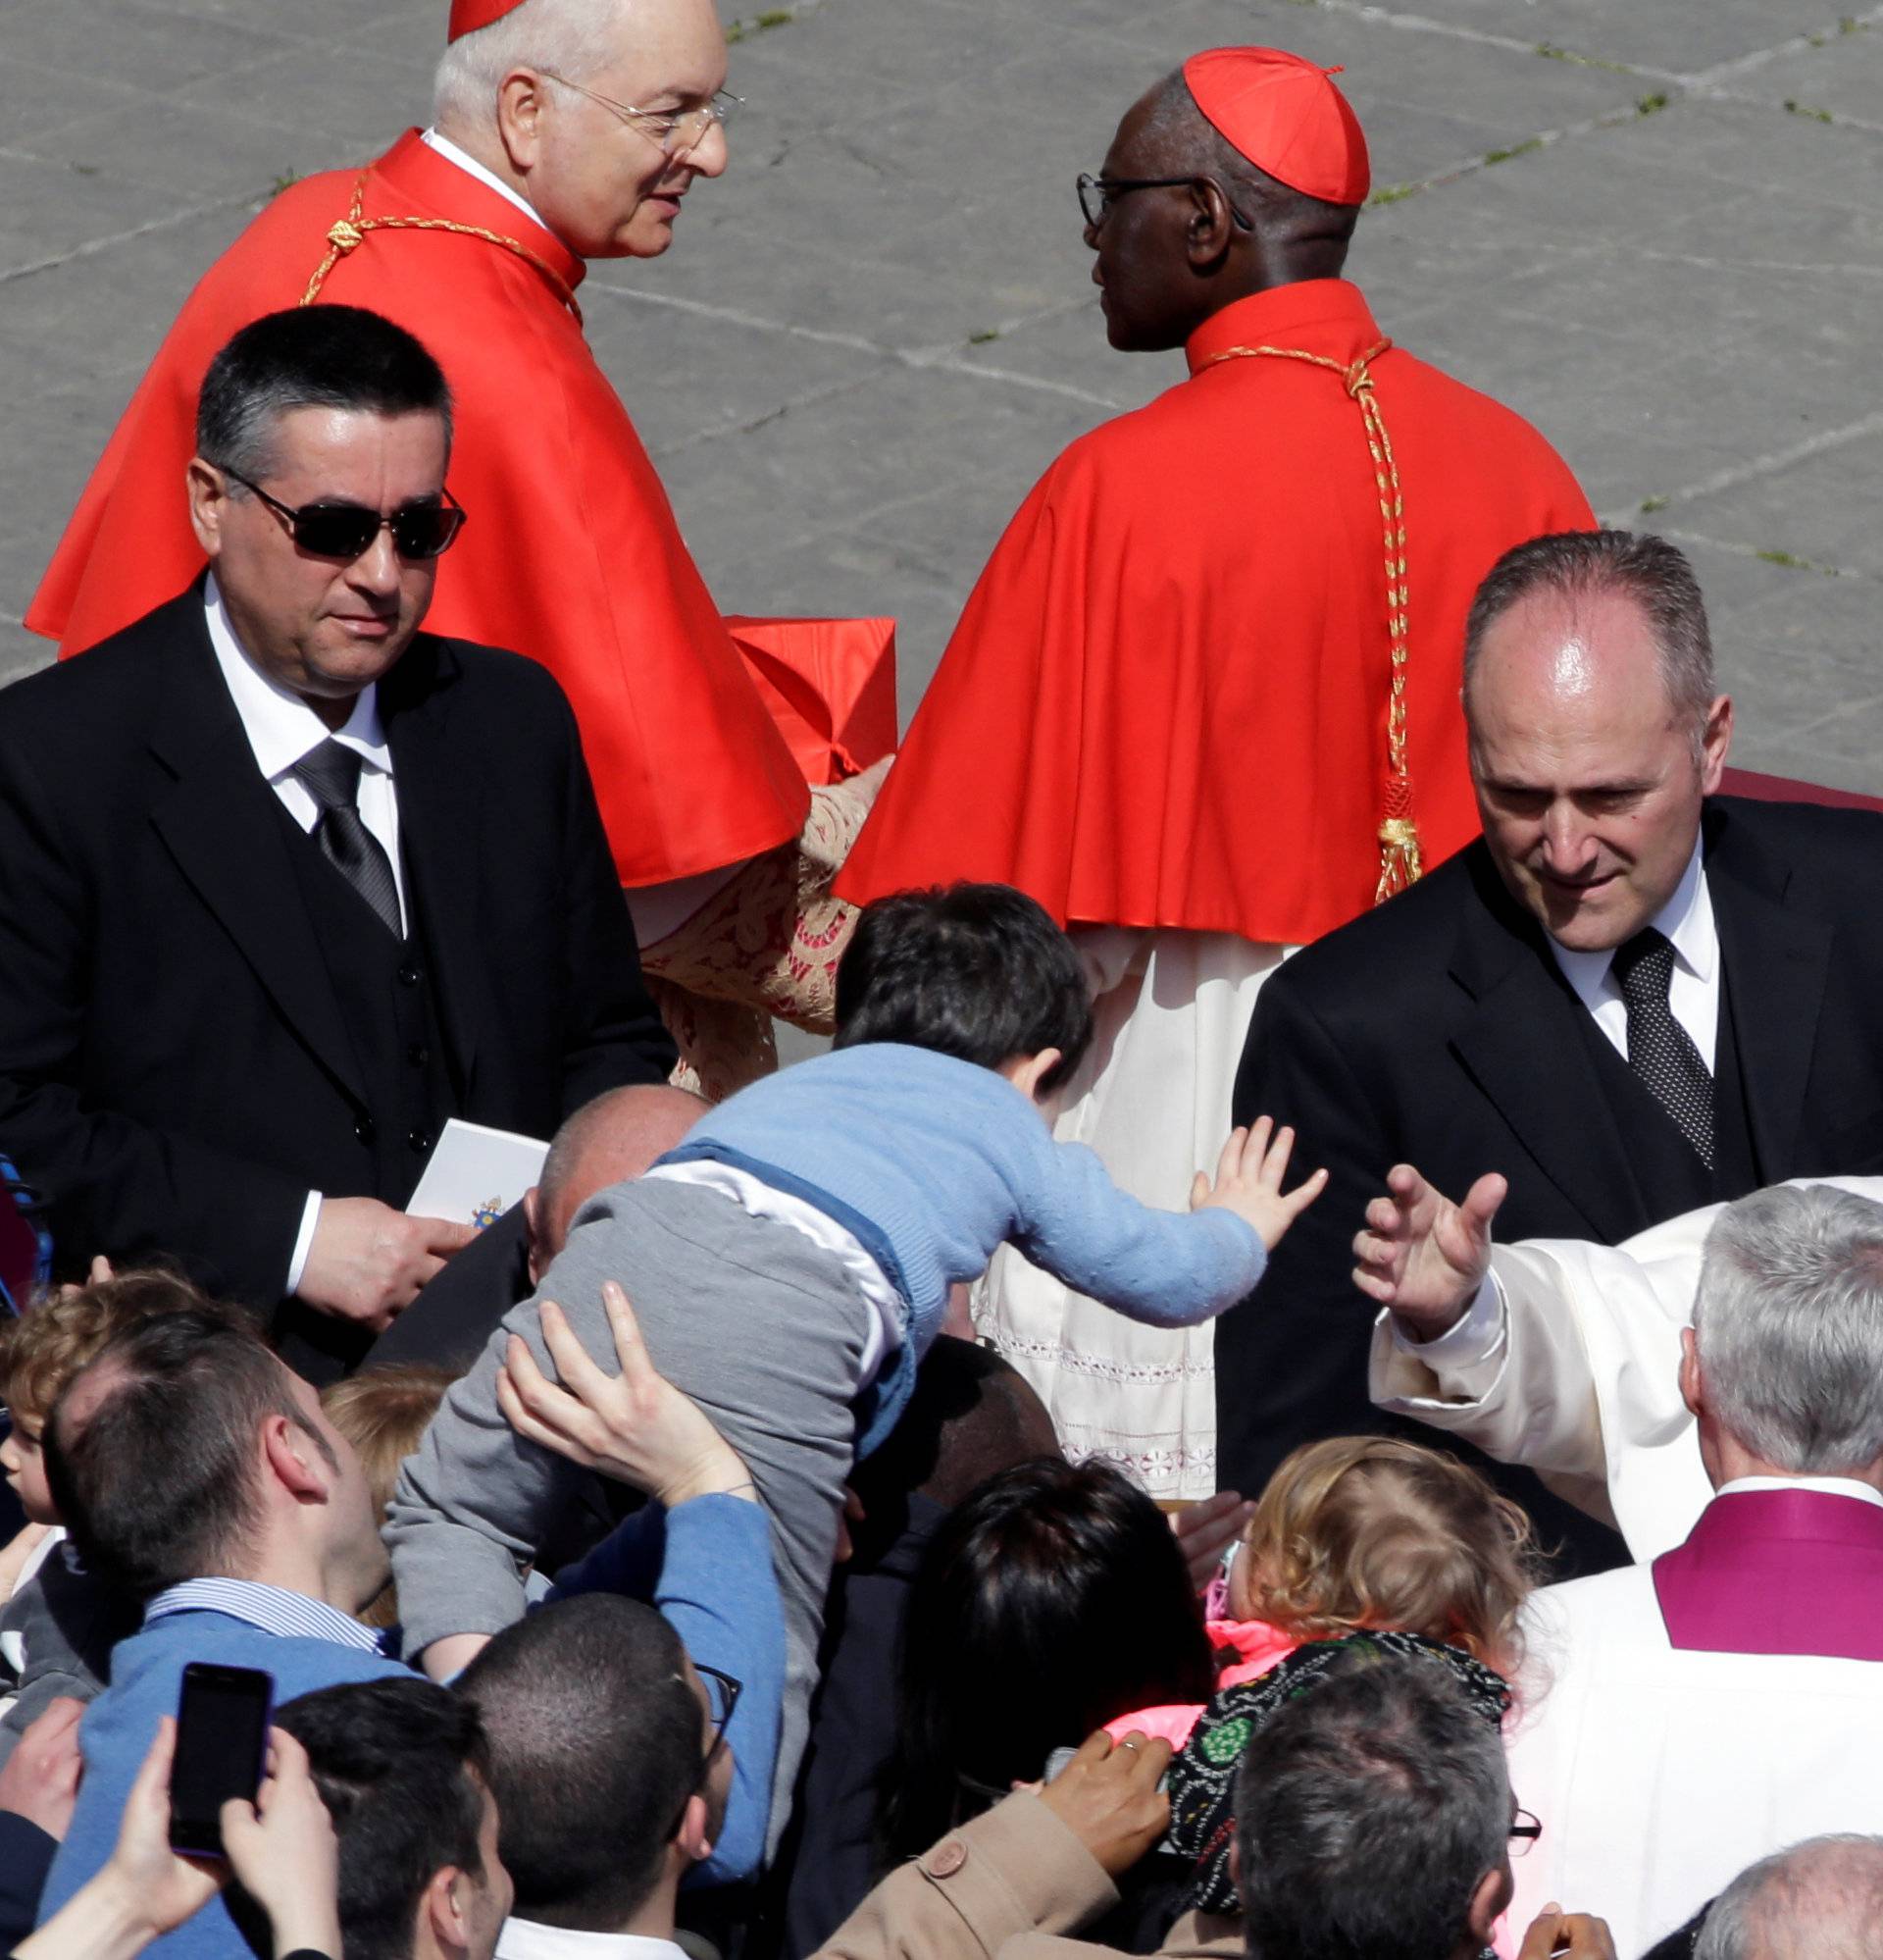 Pope Francis greets a child at the end of the Easter Mass at St. Peter's Square at the Vatican